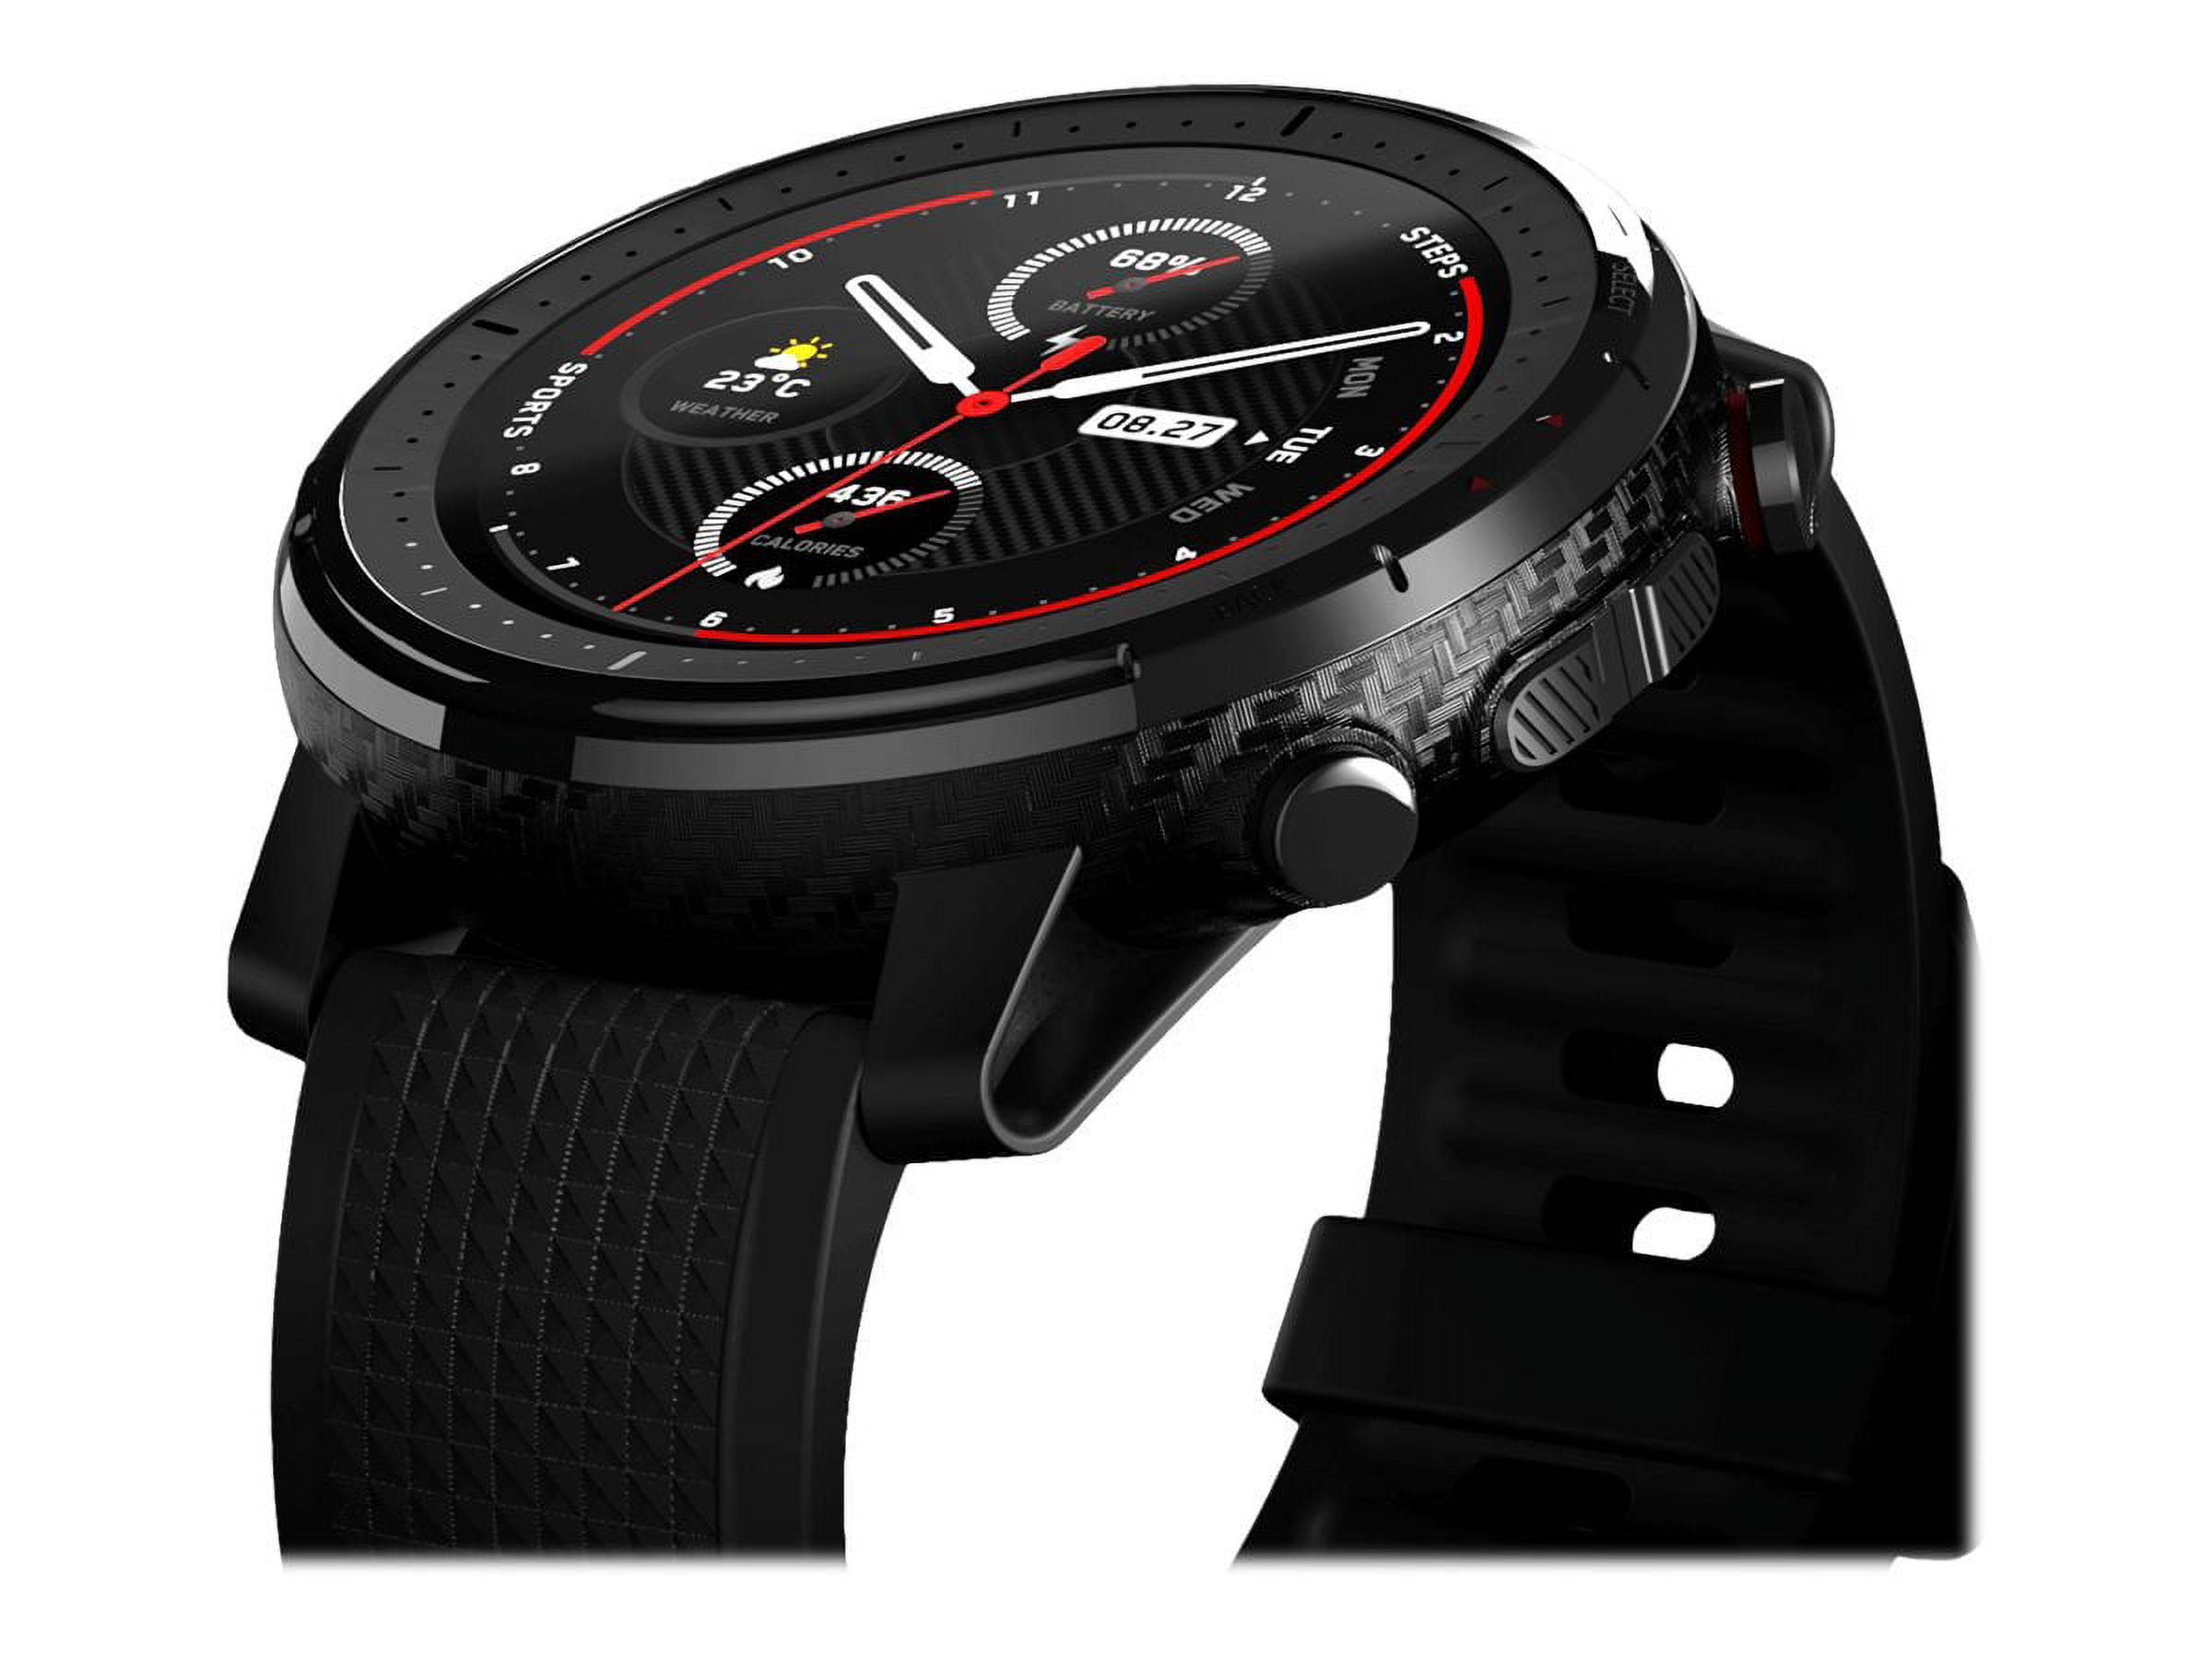 Amazfit Stratos 3 - 48.6 mm - black - sport watch with strap - silicone -  black - wrist size: 4.72 in - 7.68 in - display 1.34 - Wi-Fi, Bluetooth 